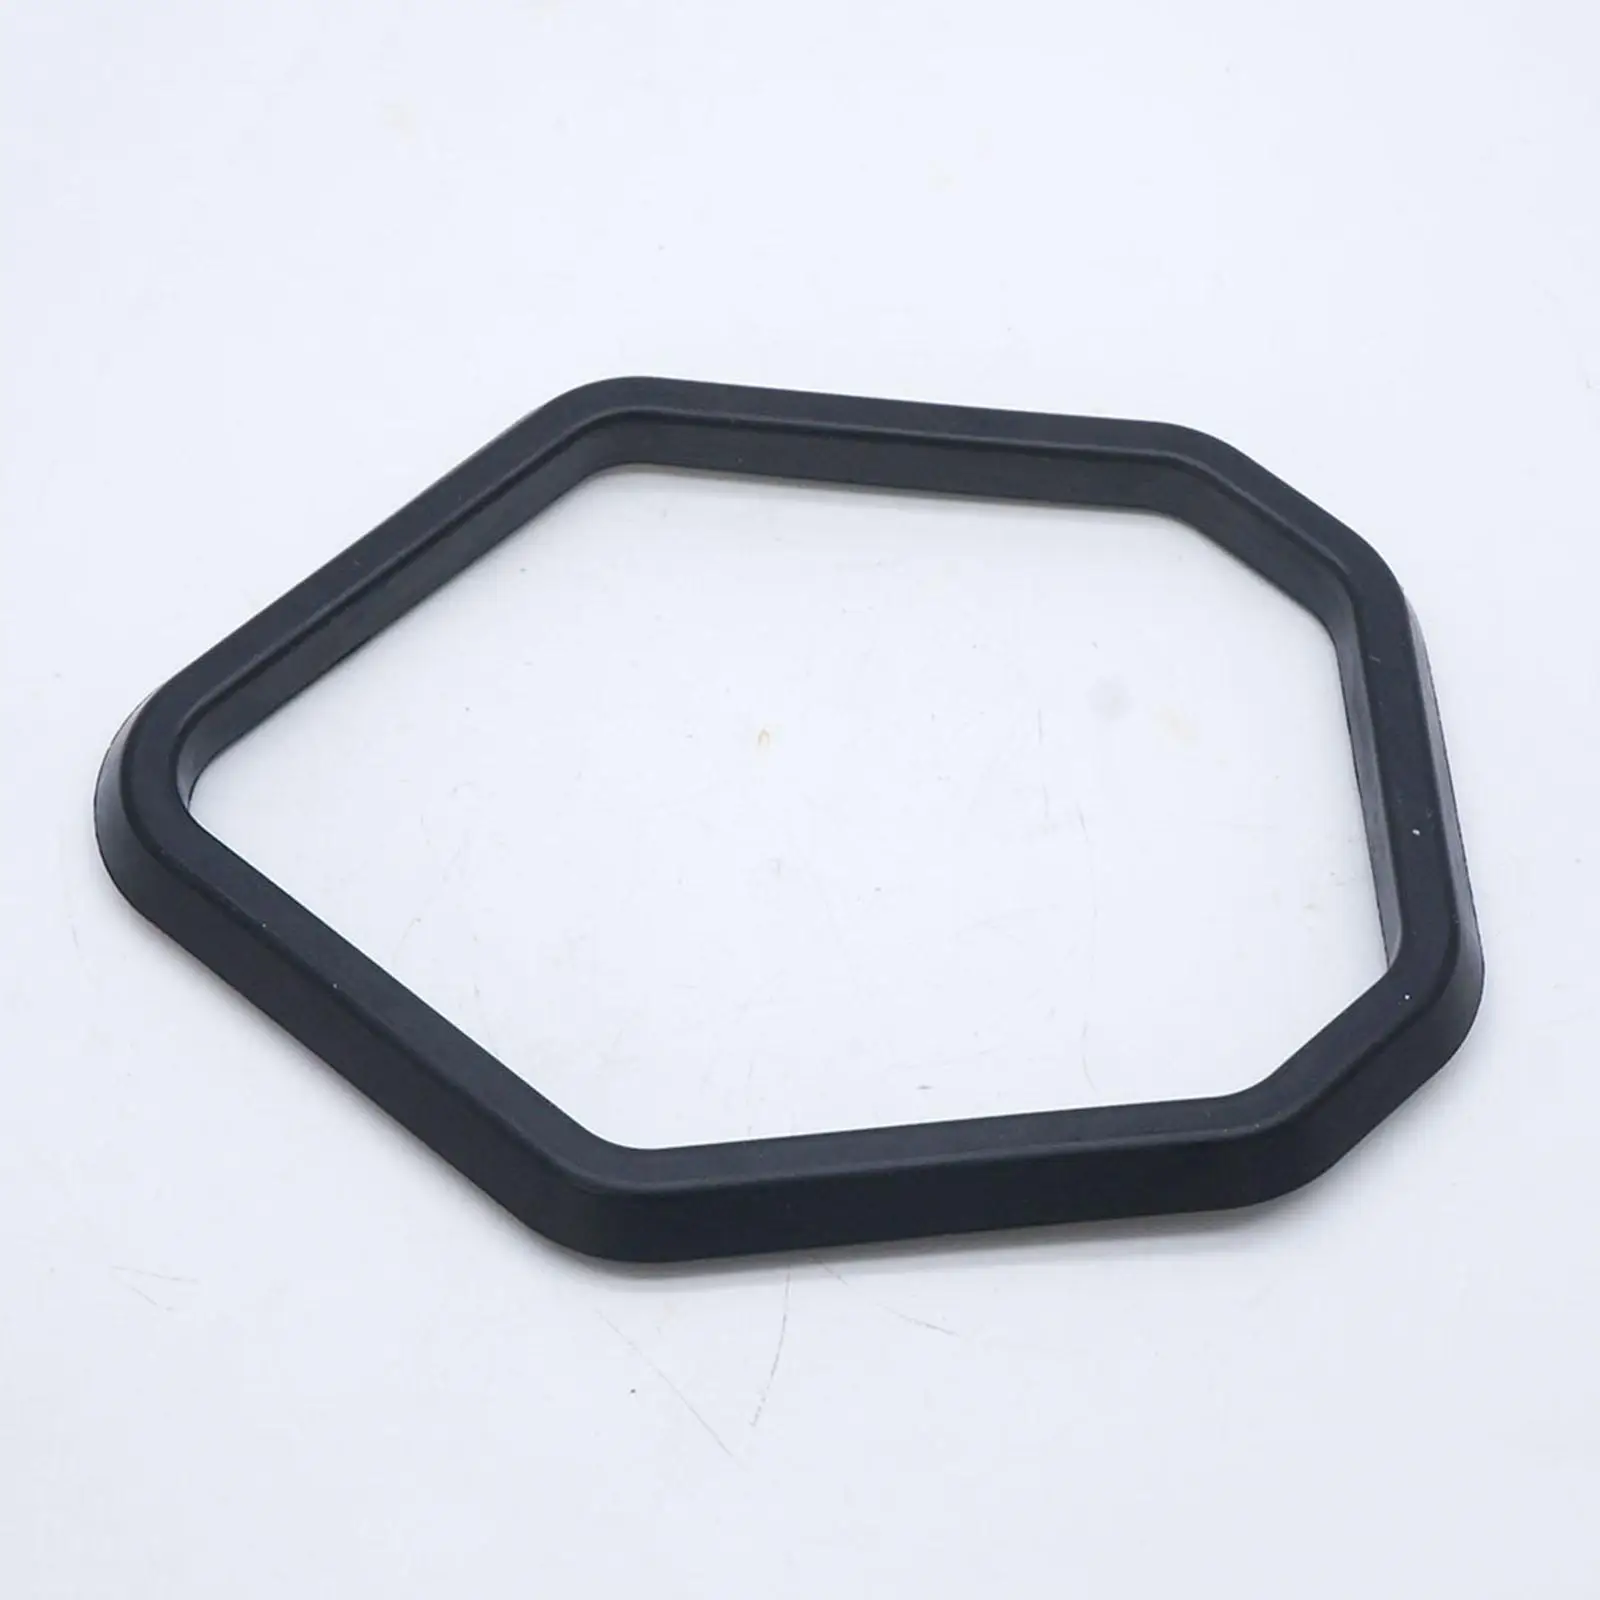 6E5-45123 New Gasket Replacement Fits for Outboard Motor 115 250HP 6E5-45123-00 Boat Parts